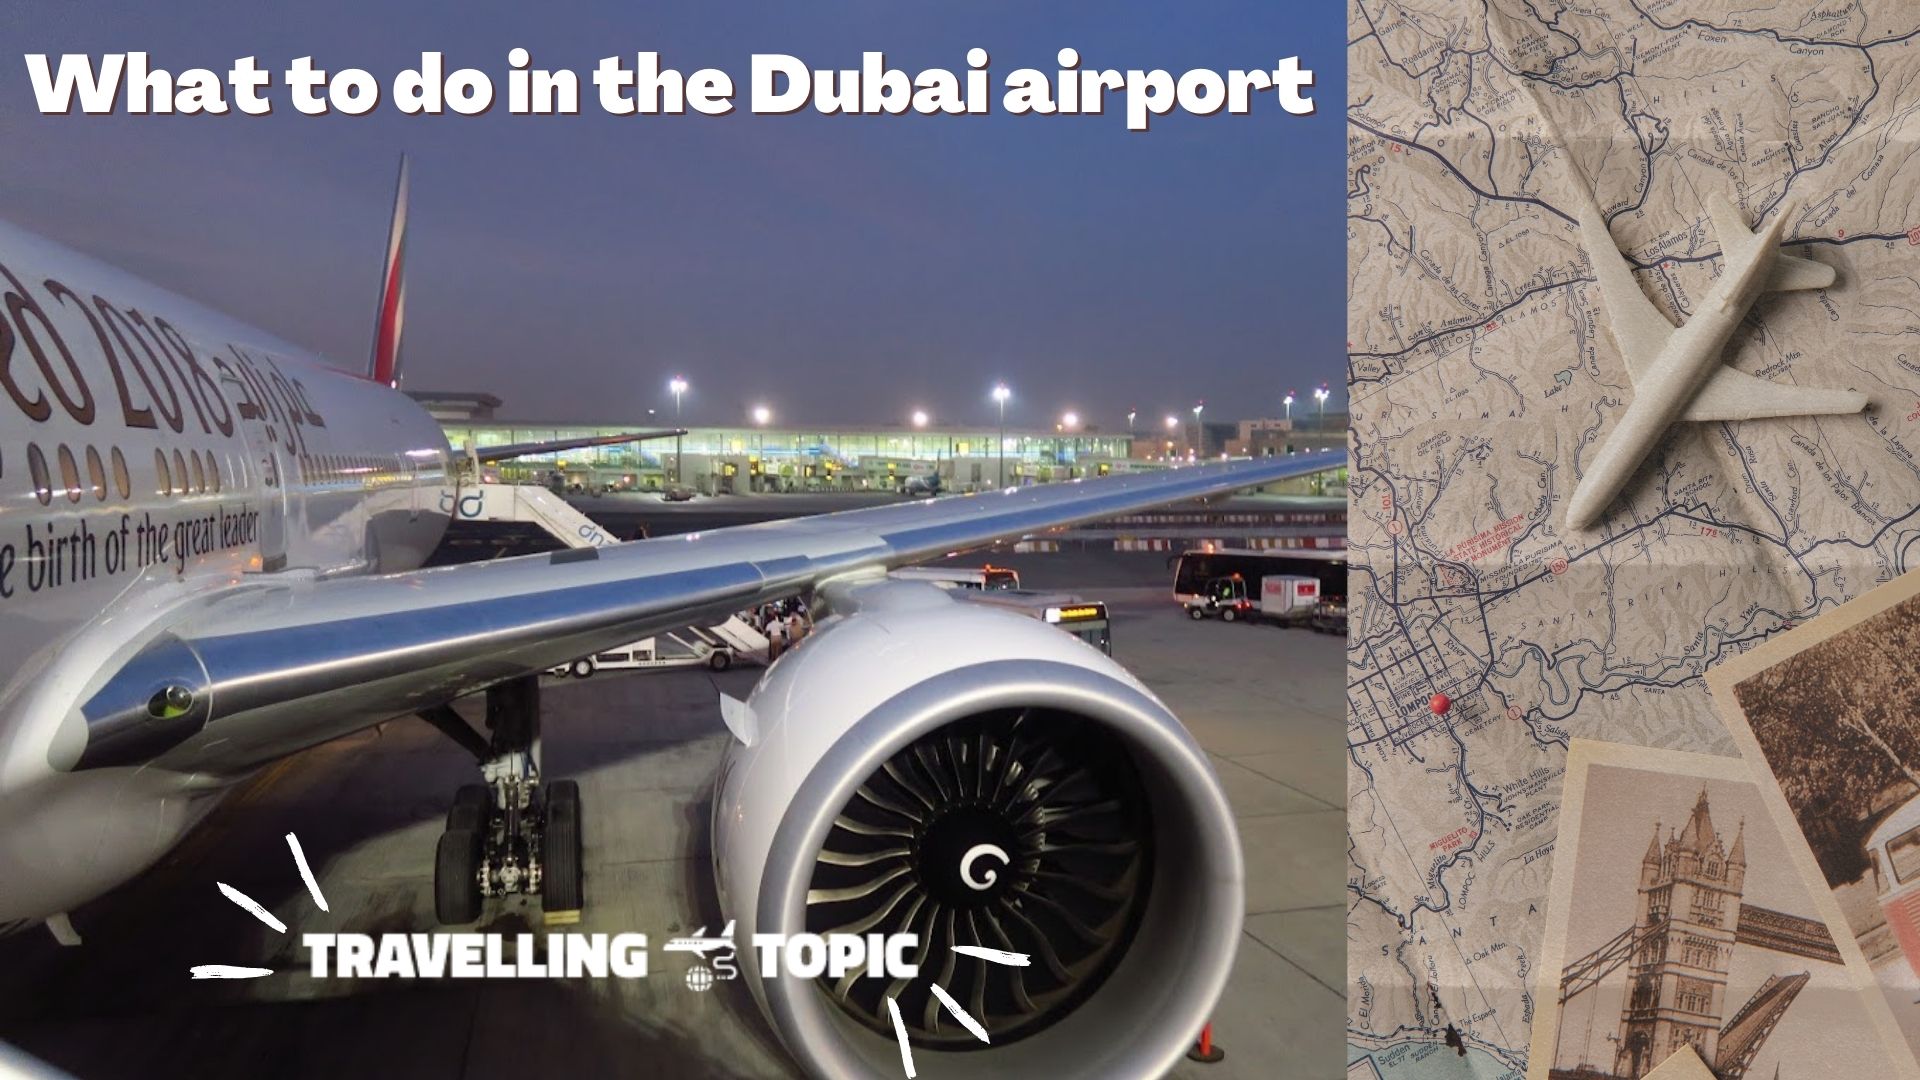 What to do in the Dubai airport